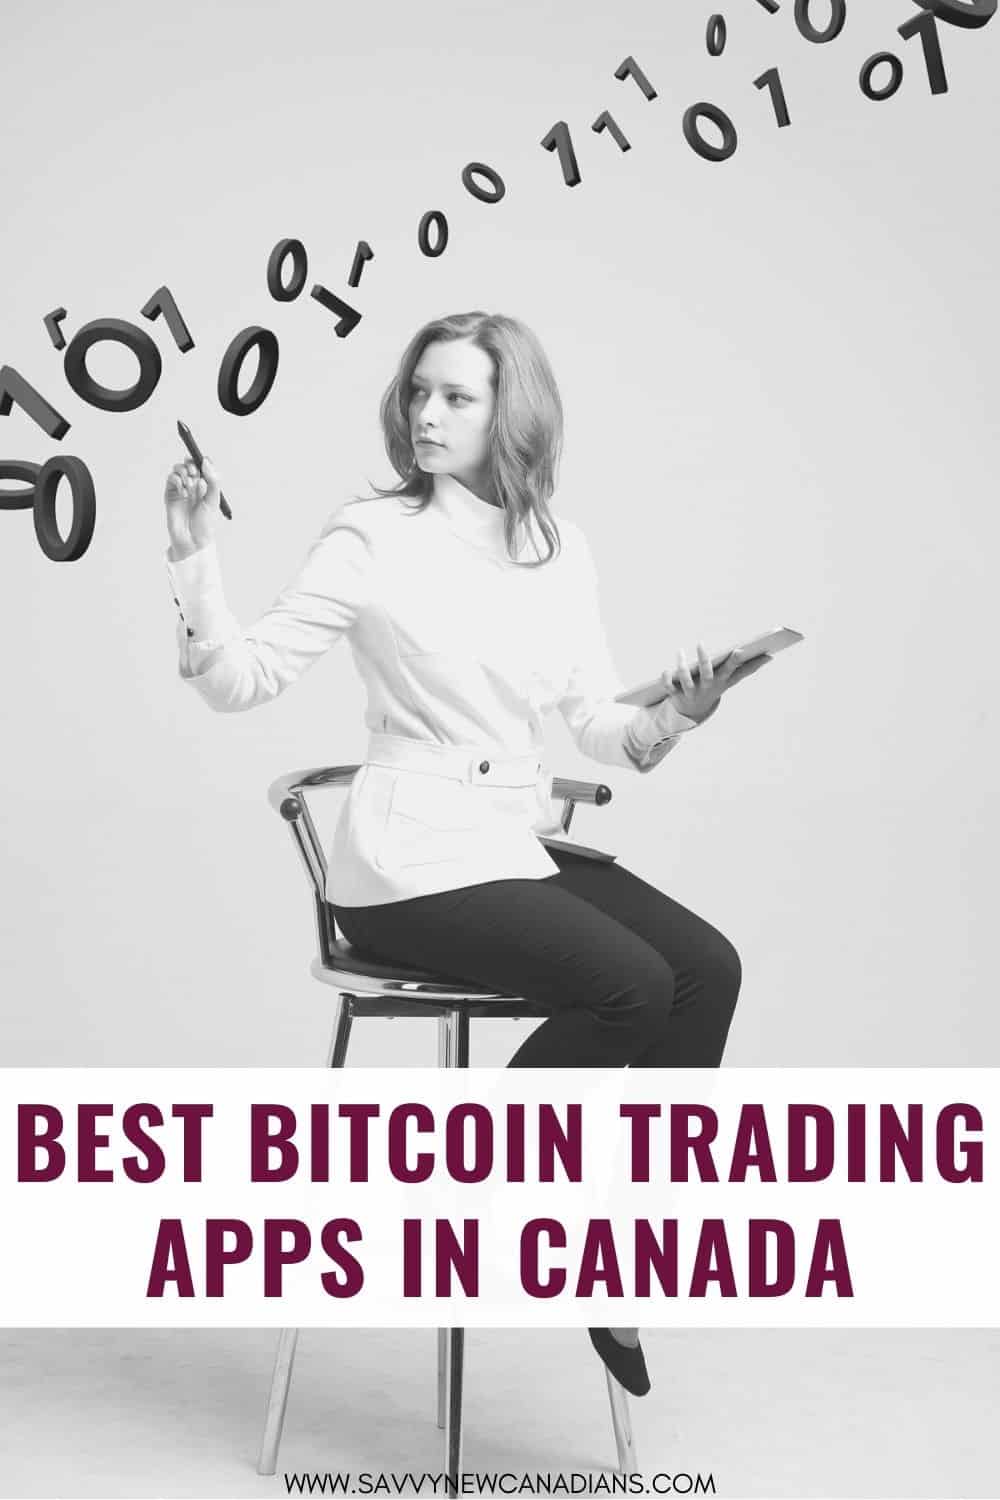 Best Bitcoin Trading Apps and Platforms in Canada (2022)